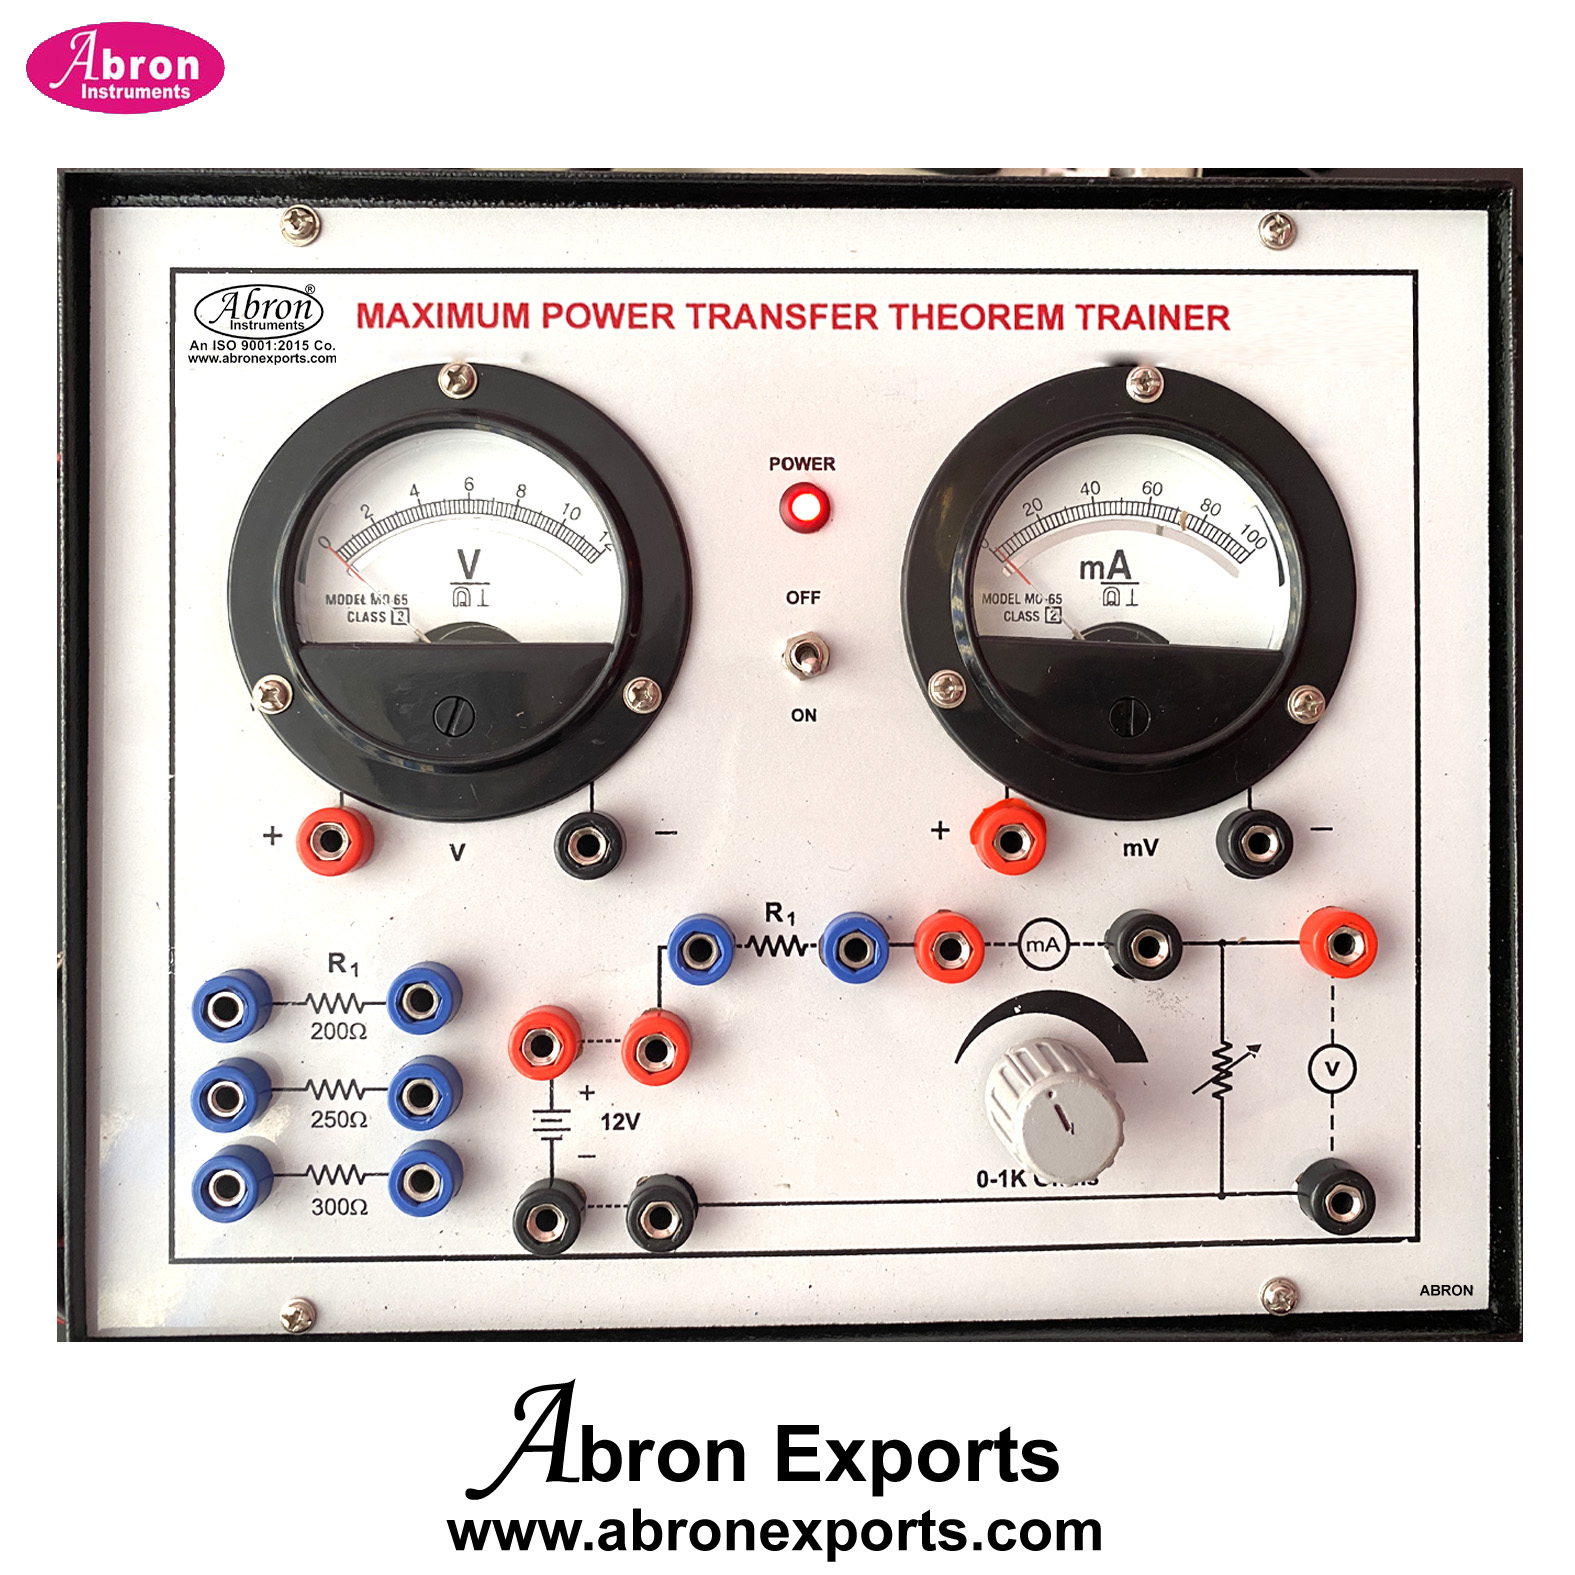 Study Theorem Maximum Power Transformer Theorem With Power Supply 2 Meters Electronic Trainer Kit Abron AE-1430MXT 